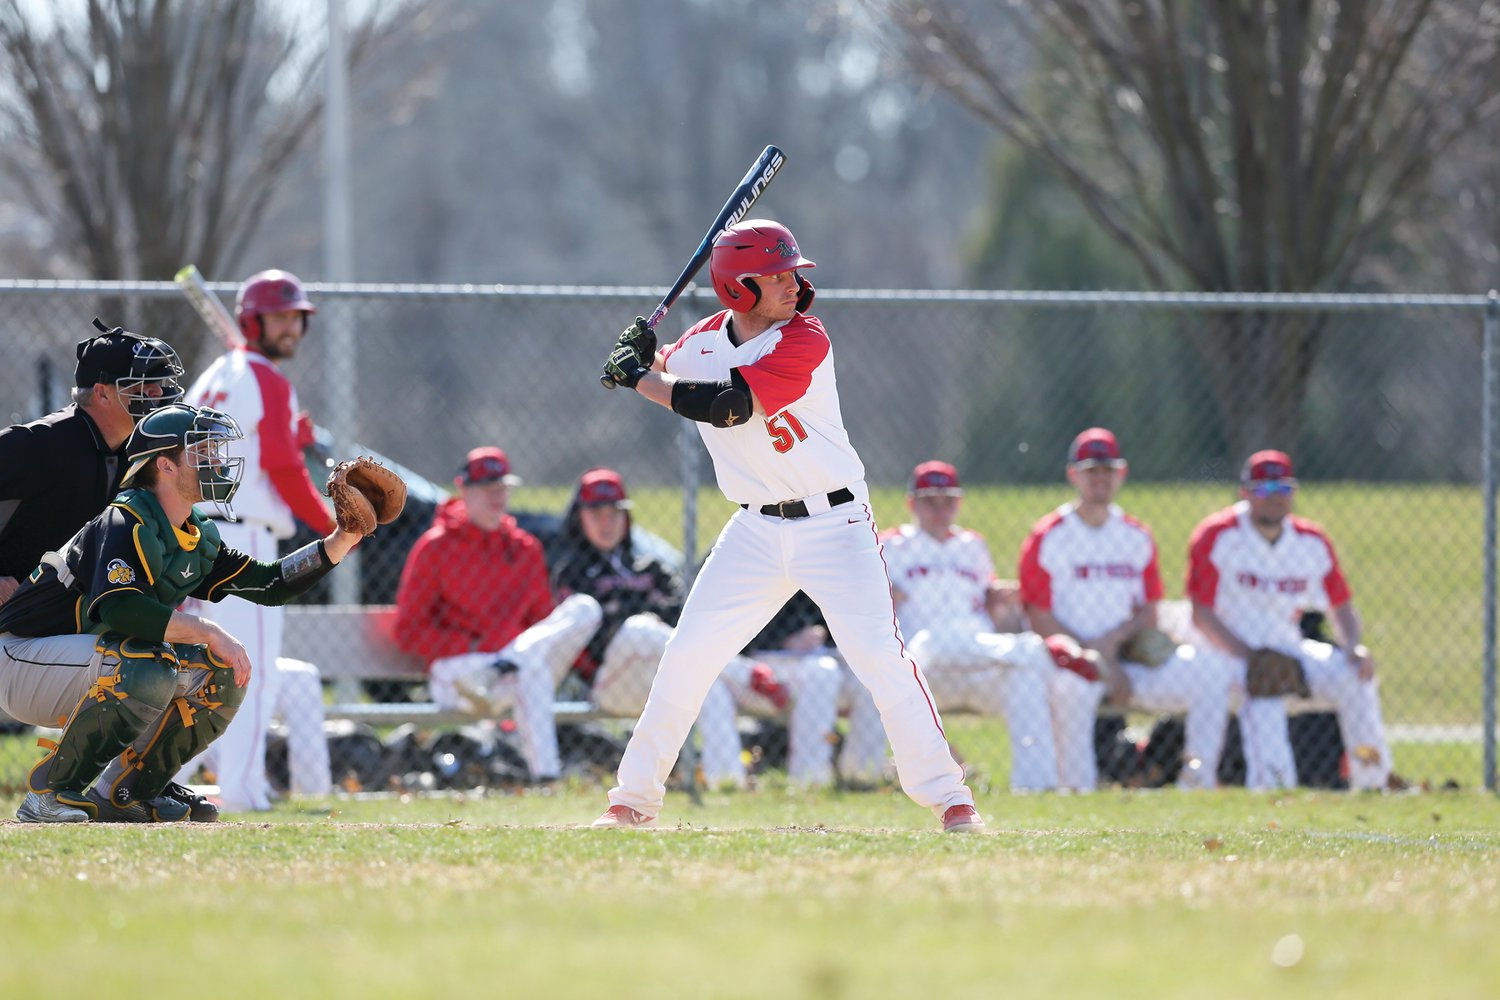 Pennridge’s Dave Tatoian, a two-time All-American, leaves Gwynedd Mercy as the Griffins’ all-time leader in RBIs, total bases and intentional walks.  Photograph courtesy of Gwynedd Mercy.